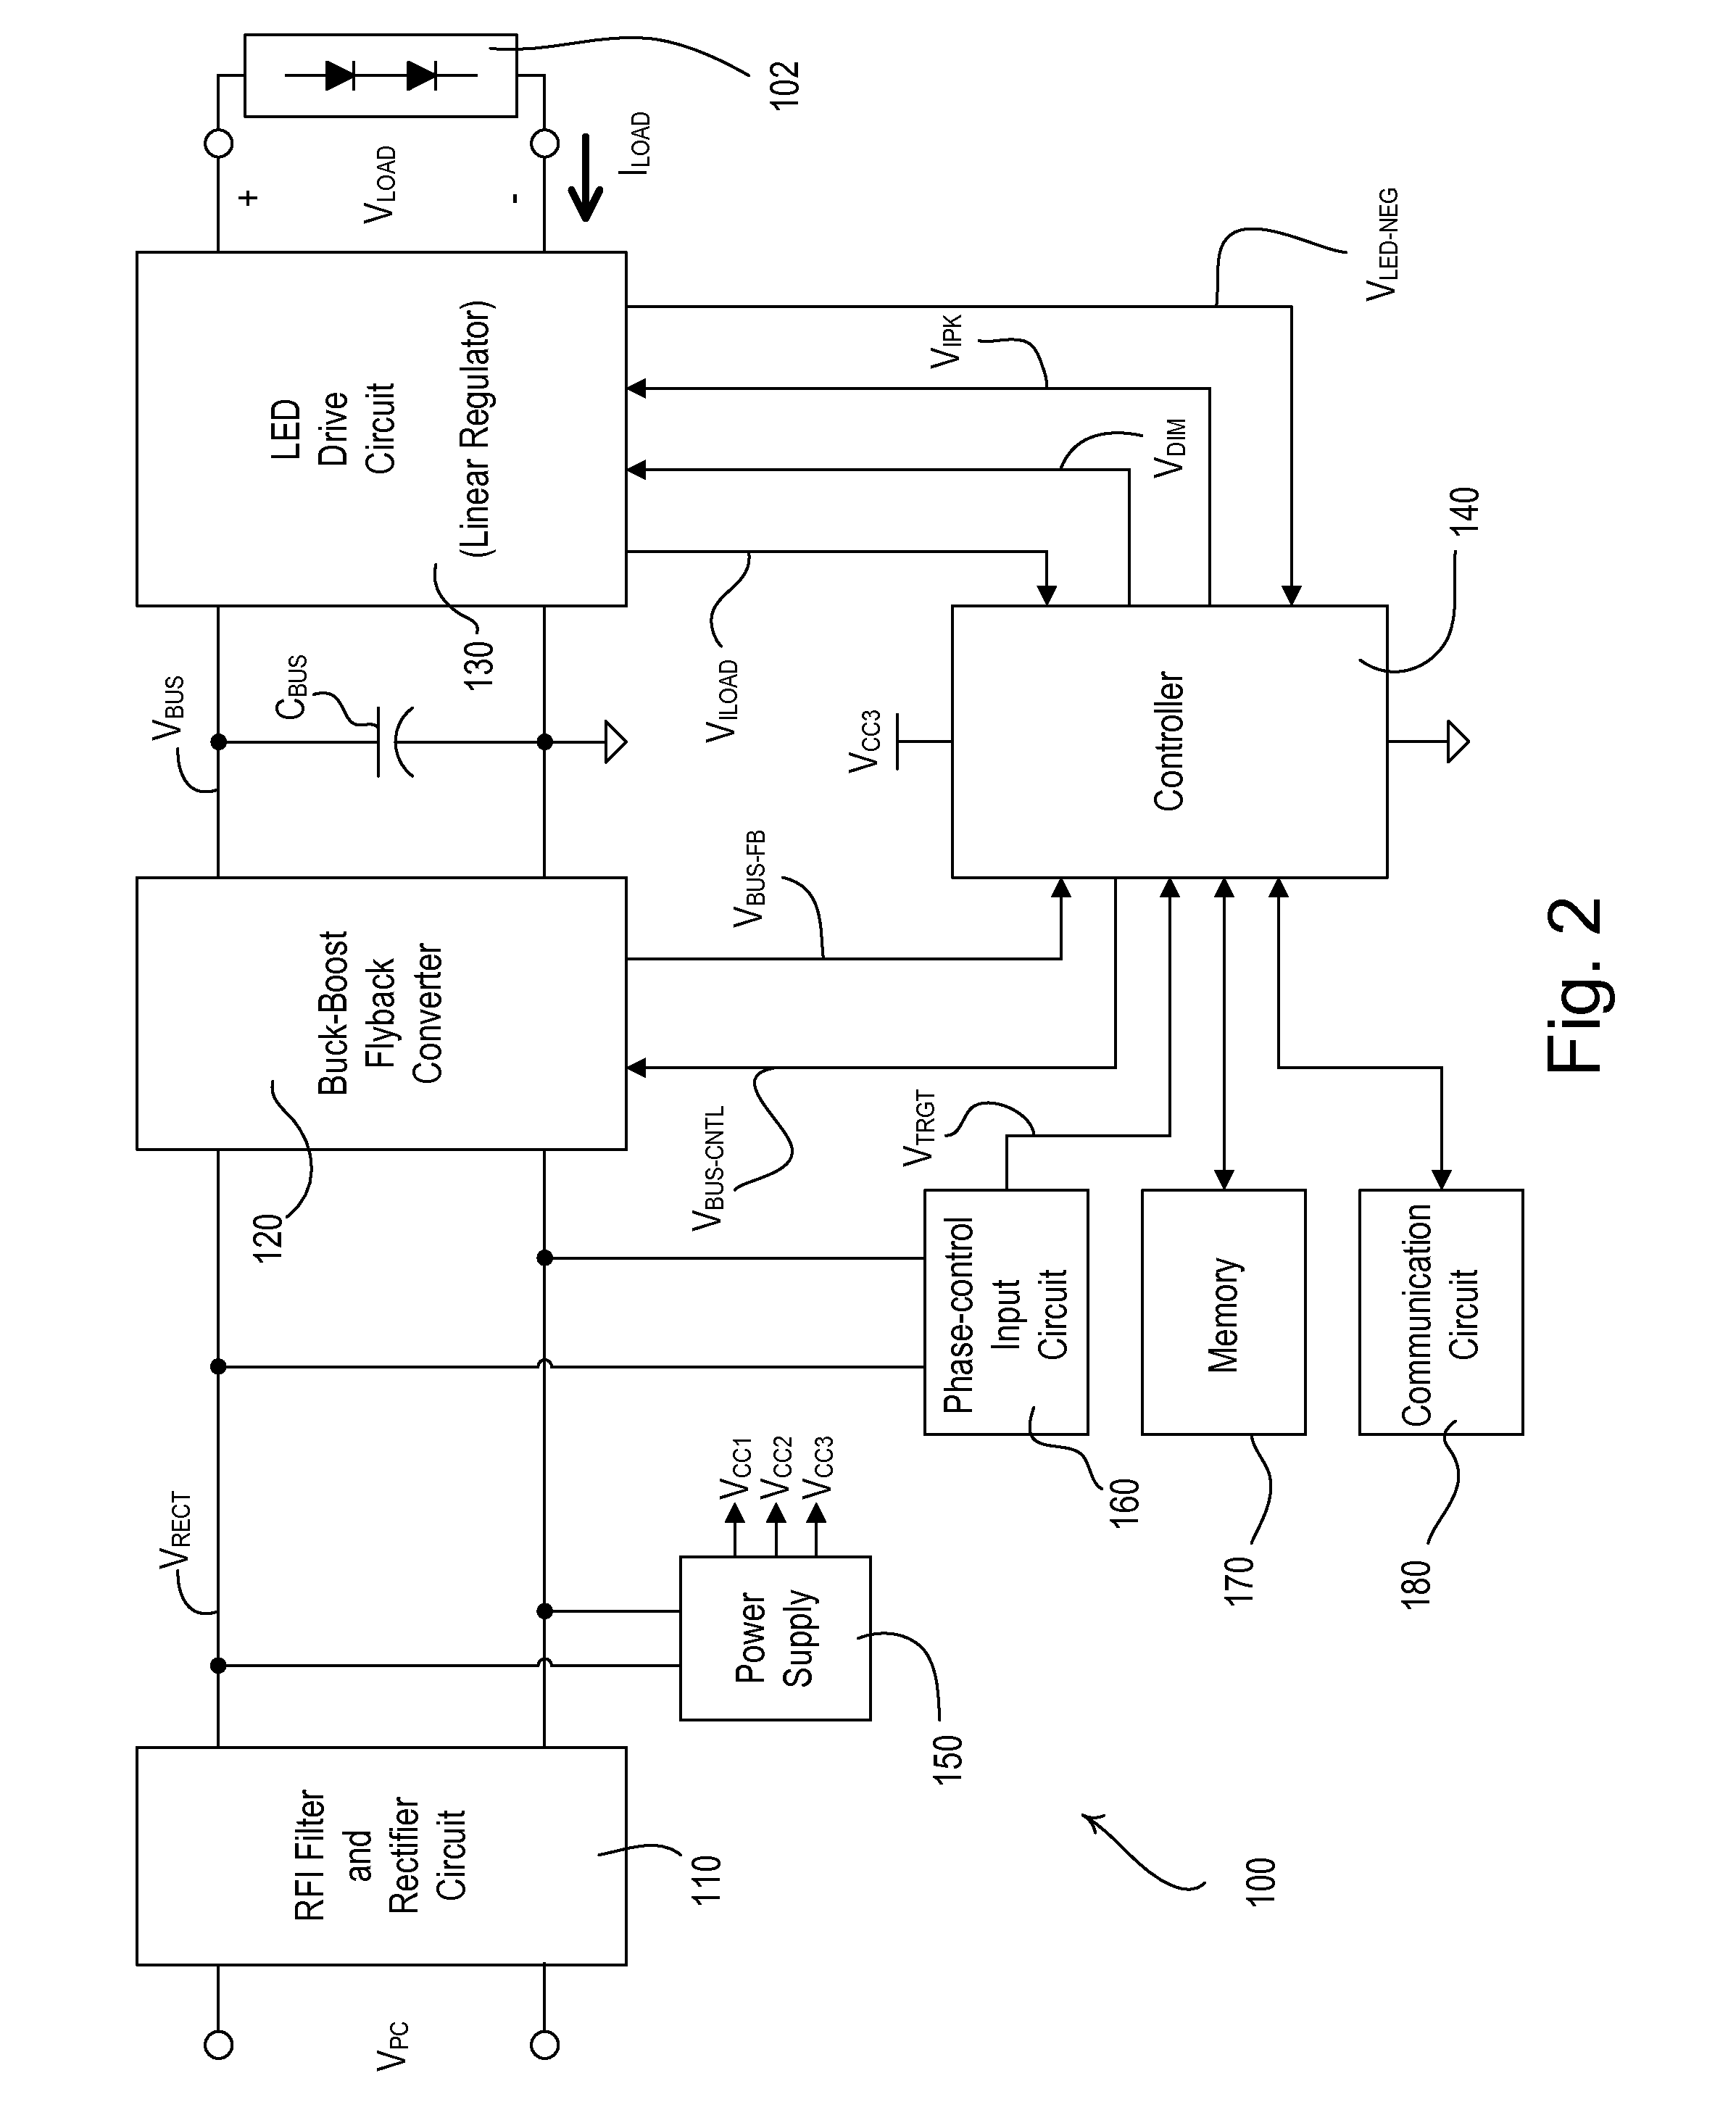 Load control device for a light-emitting diode light source